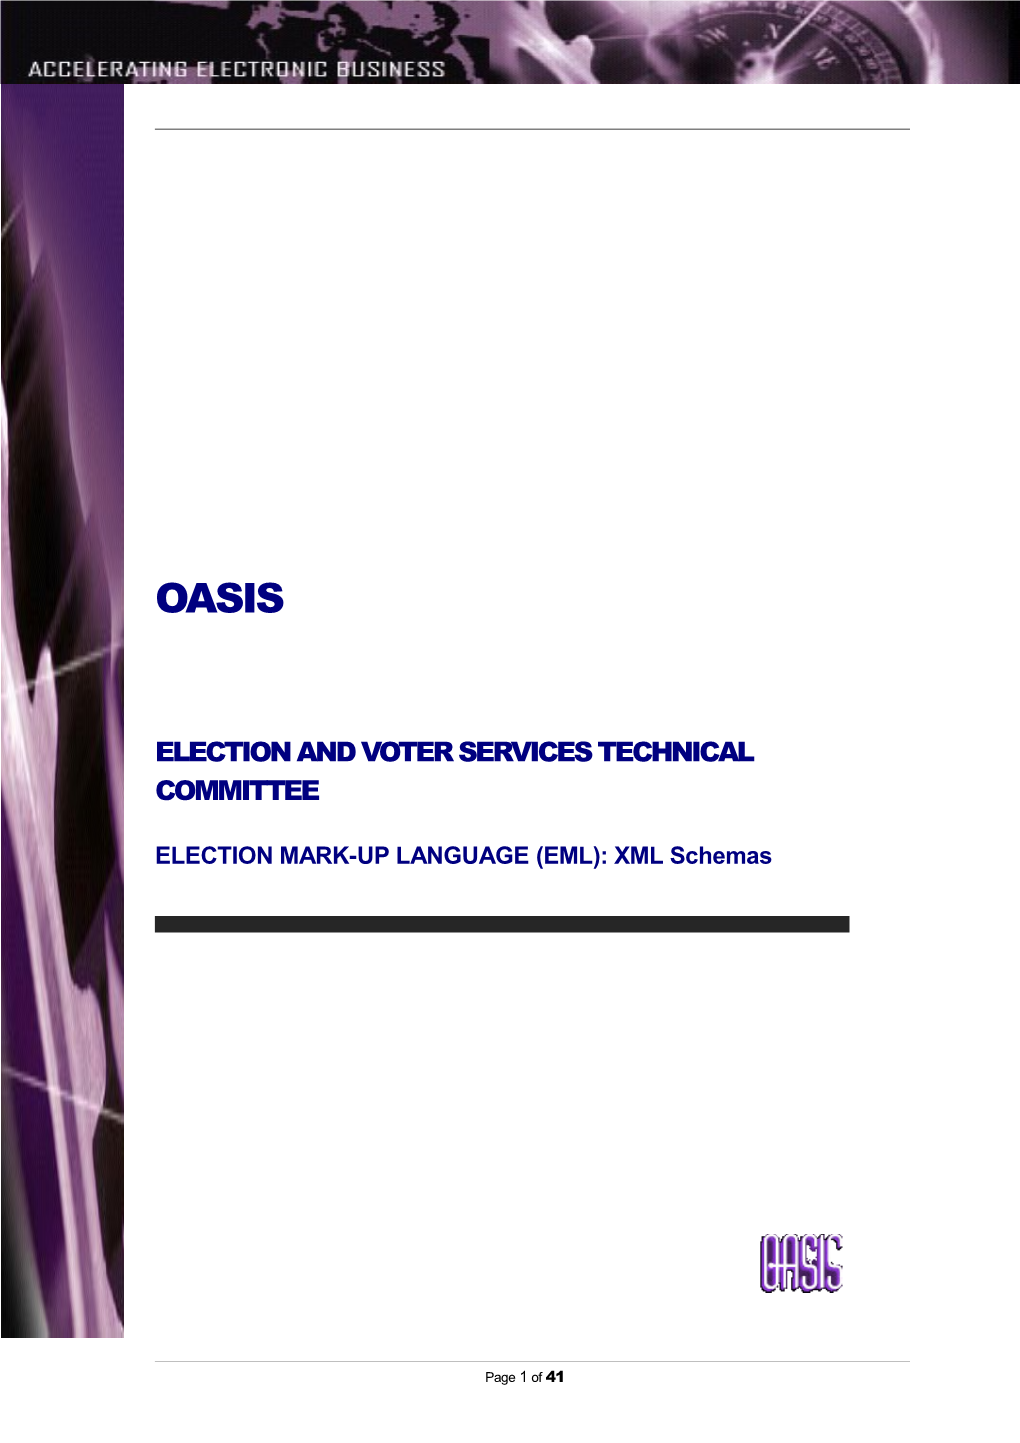 Election and Voter Services Technical Committee